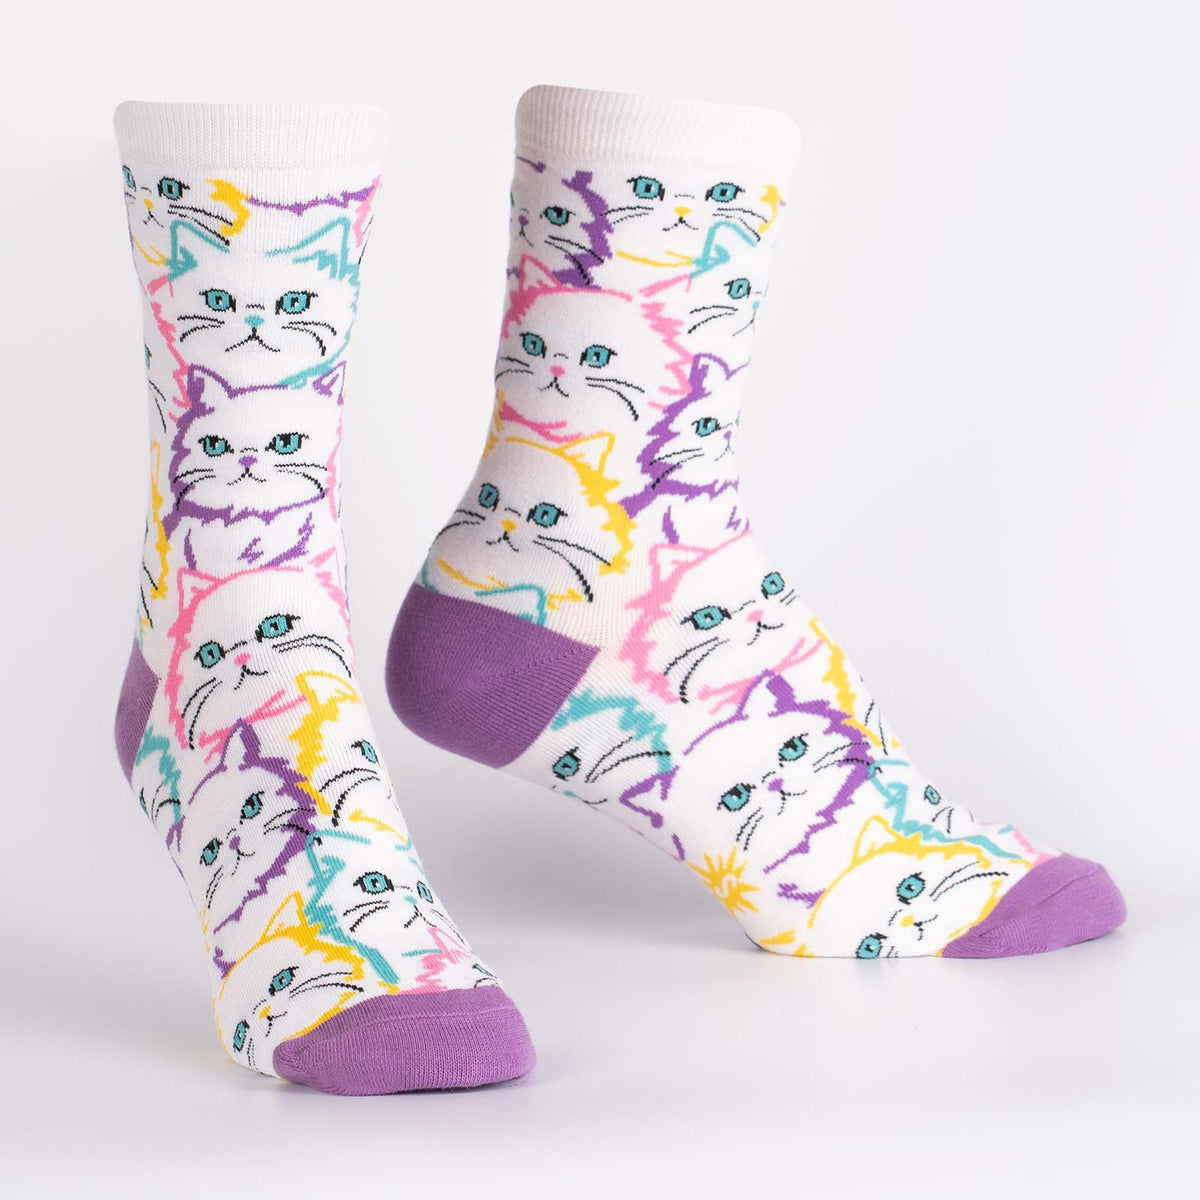 Sock It To Me Fur Real women&#39;s crew sock featuring white sock with lavender heel and toe with white cats outlined in pastel colors. Socks shown on display feet. 